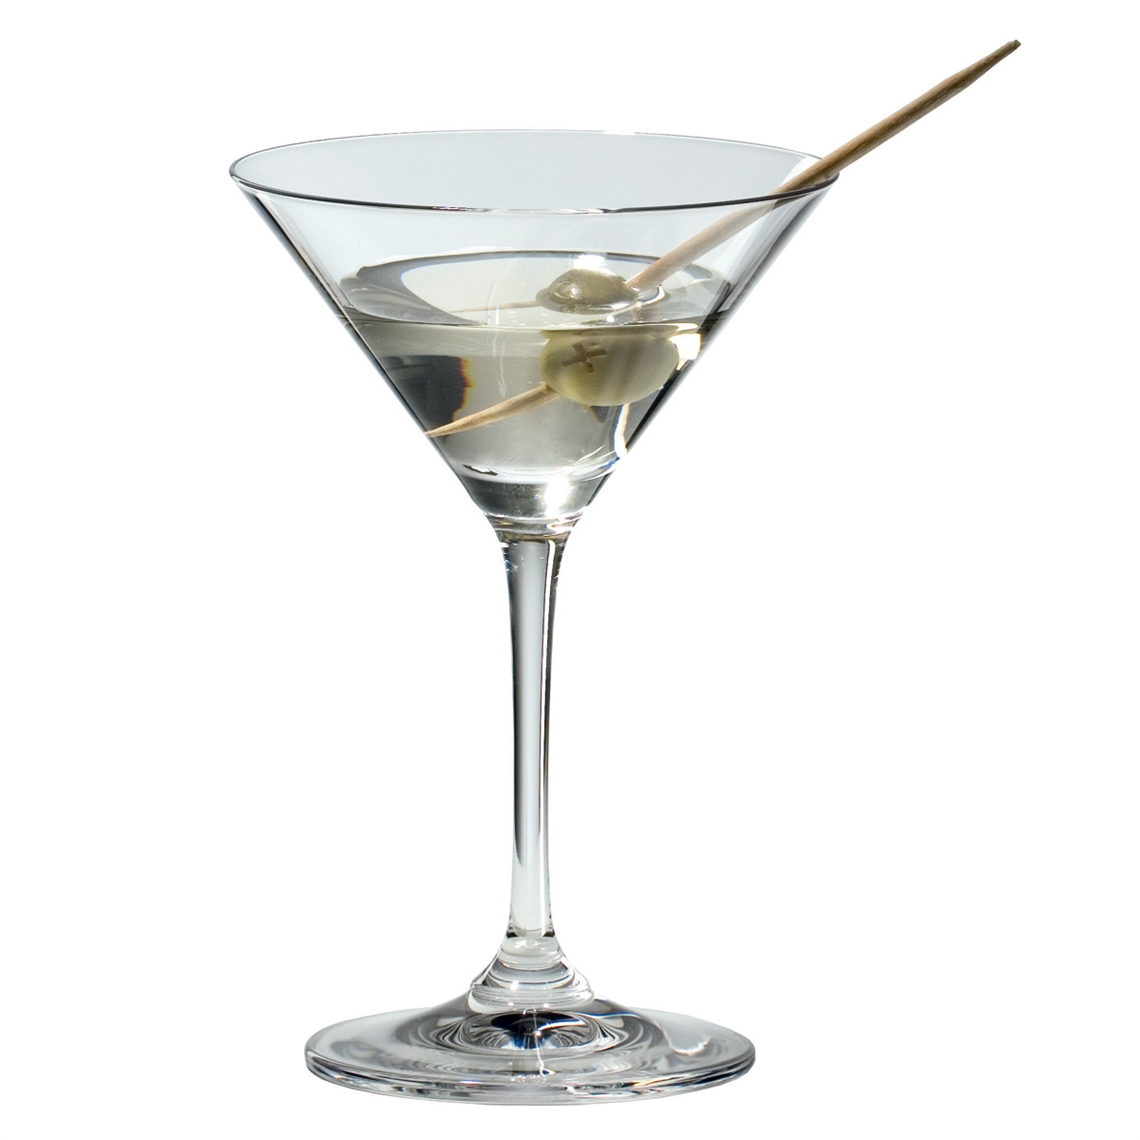 View more restaurant glasses - schott zwiesel from our Martini Glasses range